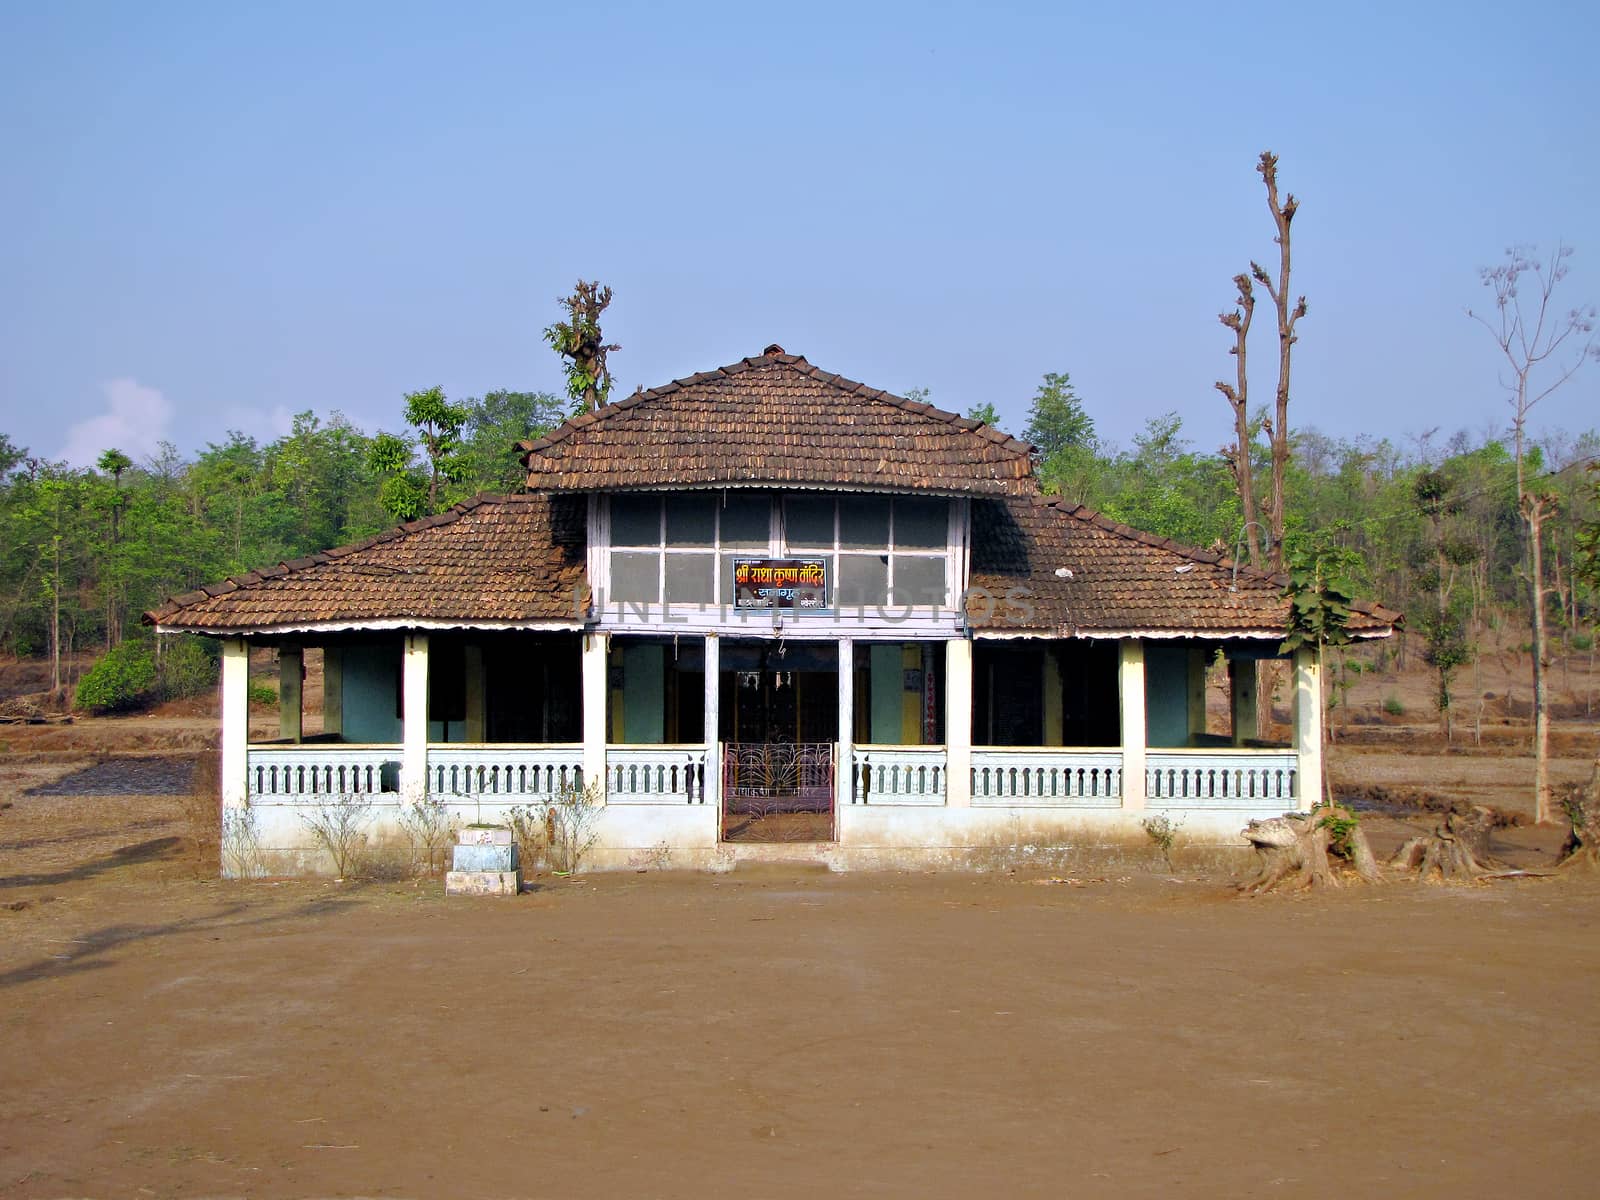 Khershet,Maharashtra,India-May 1st,2009: Typical beautiful small structure of village community hall in Konkan.